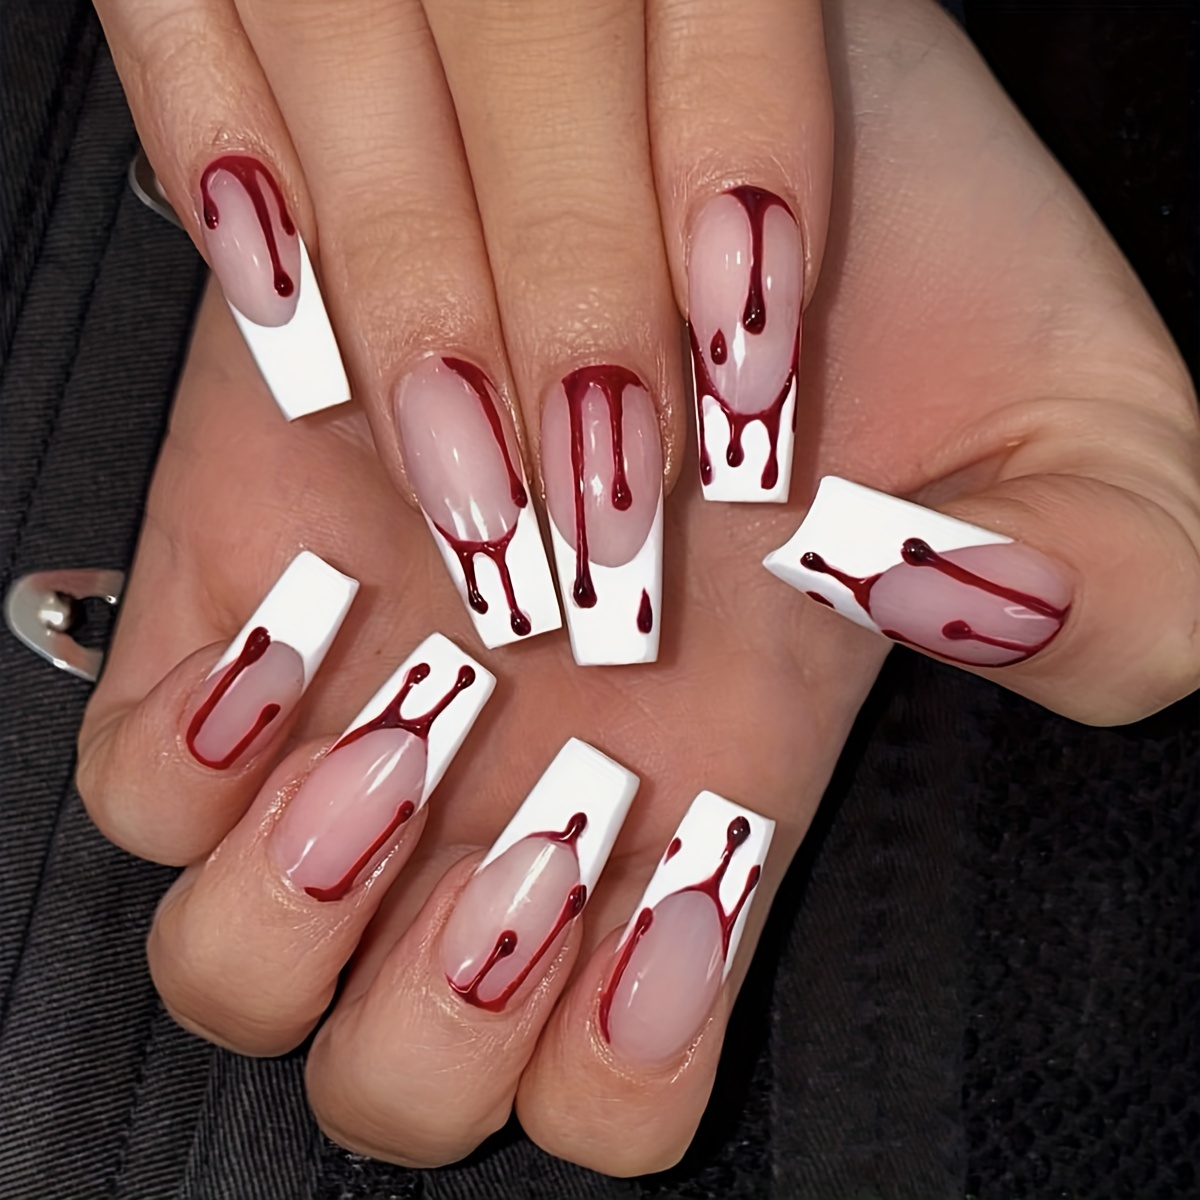 Handmade Press On Nails Blood Red Heart High-end with Removable and Elegant  and White Design for Sweet and Cool Style.No.24596 - AliExpress